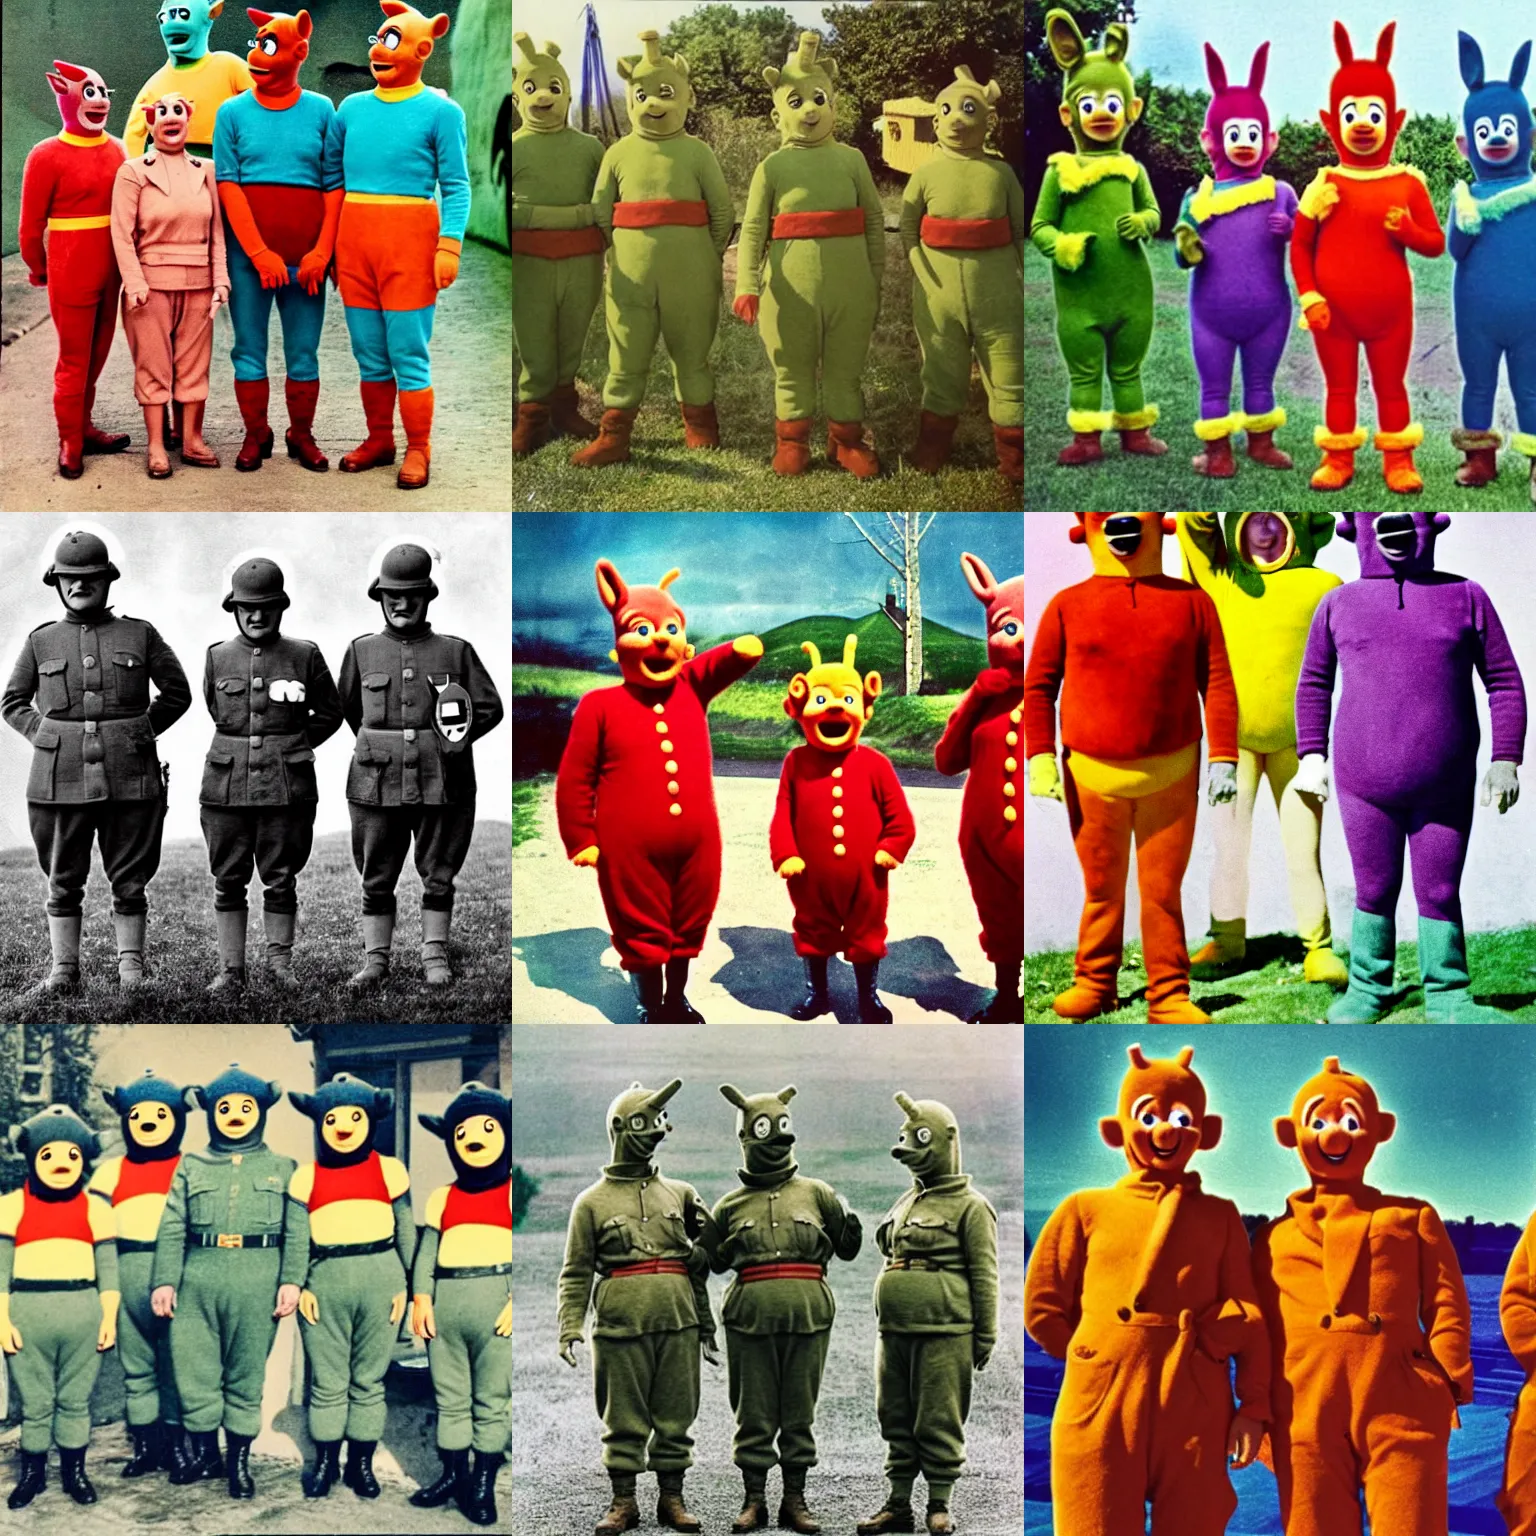 Prompt: German WW2 officers dressed up as the teletubbies, vivid colors, colorized, surreal